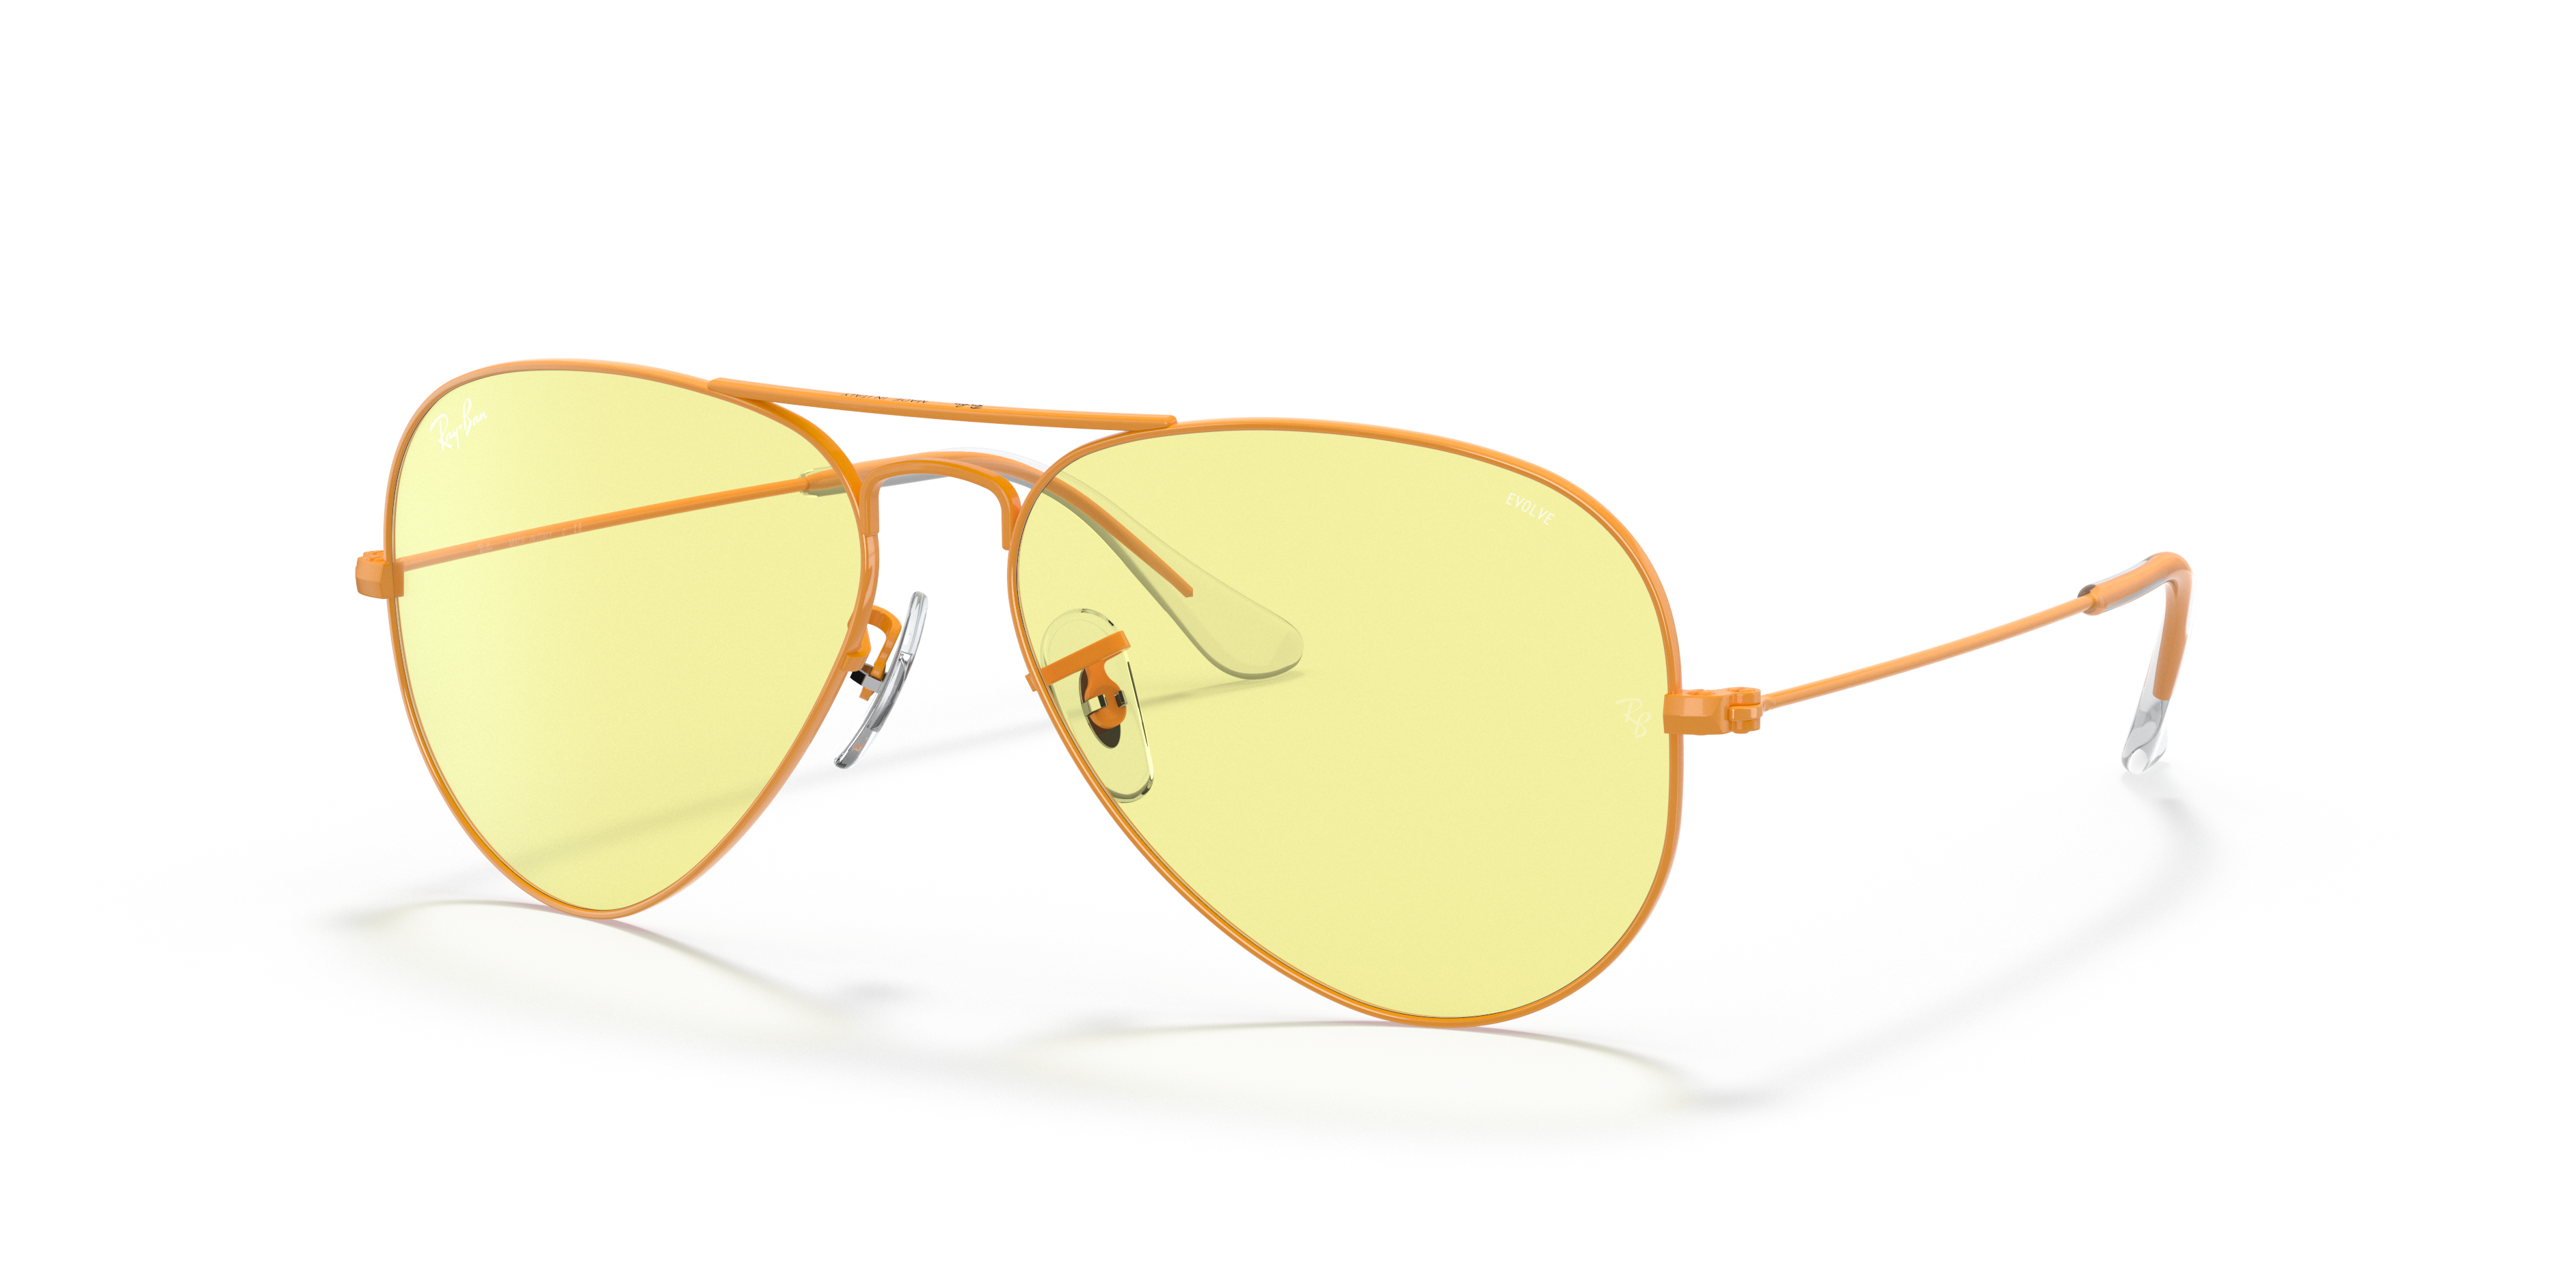 Aviator Solid Evolve Sunglasses in Orange and Yellow/Red